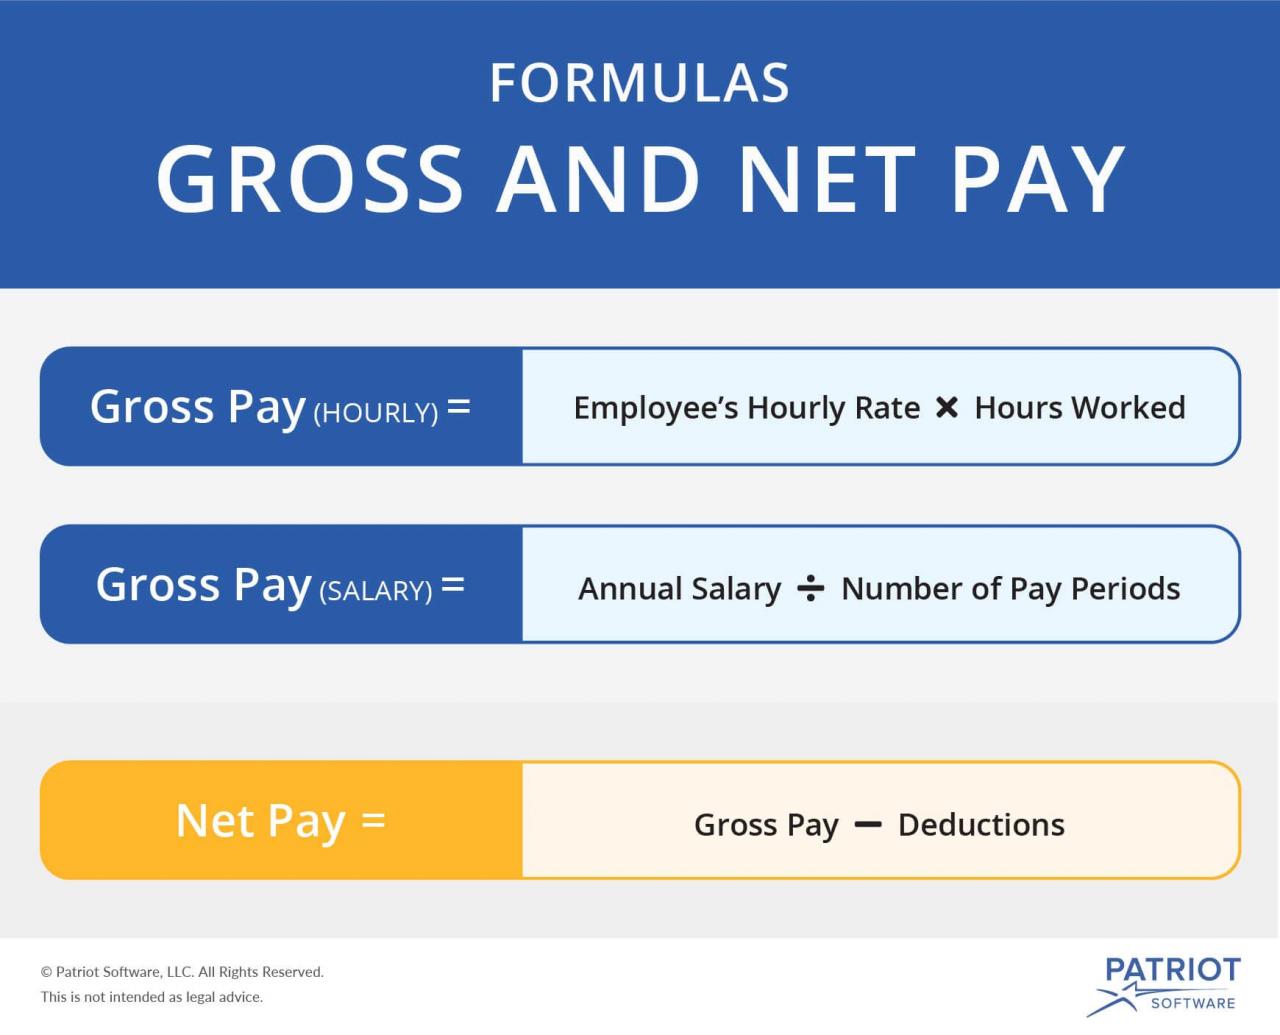 4 major deductions from an employee's gross income